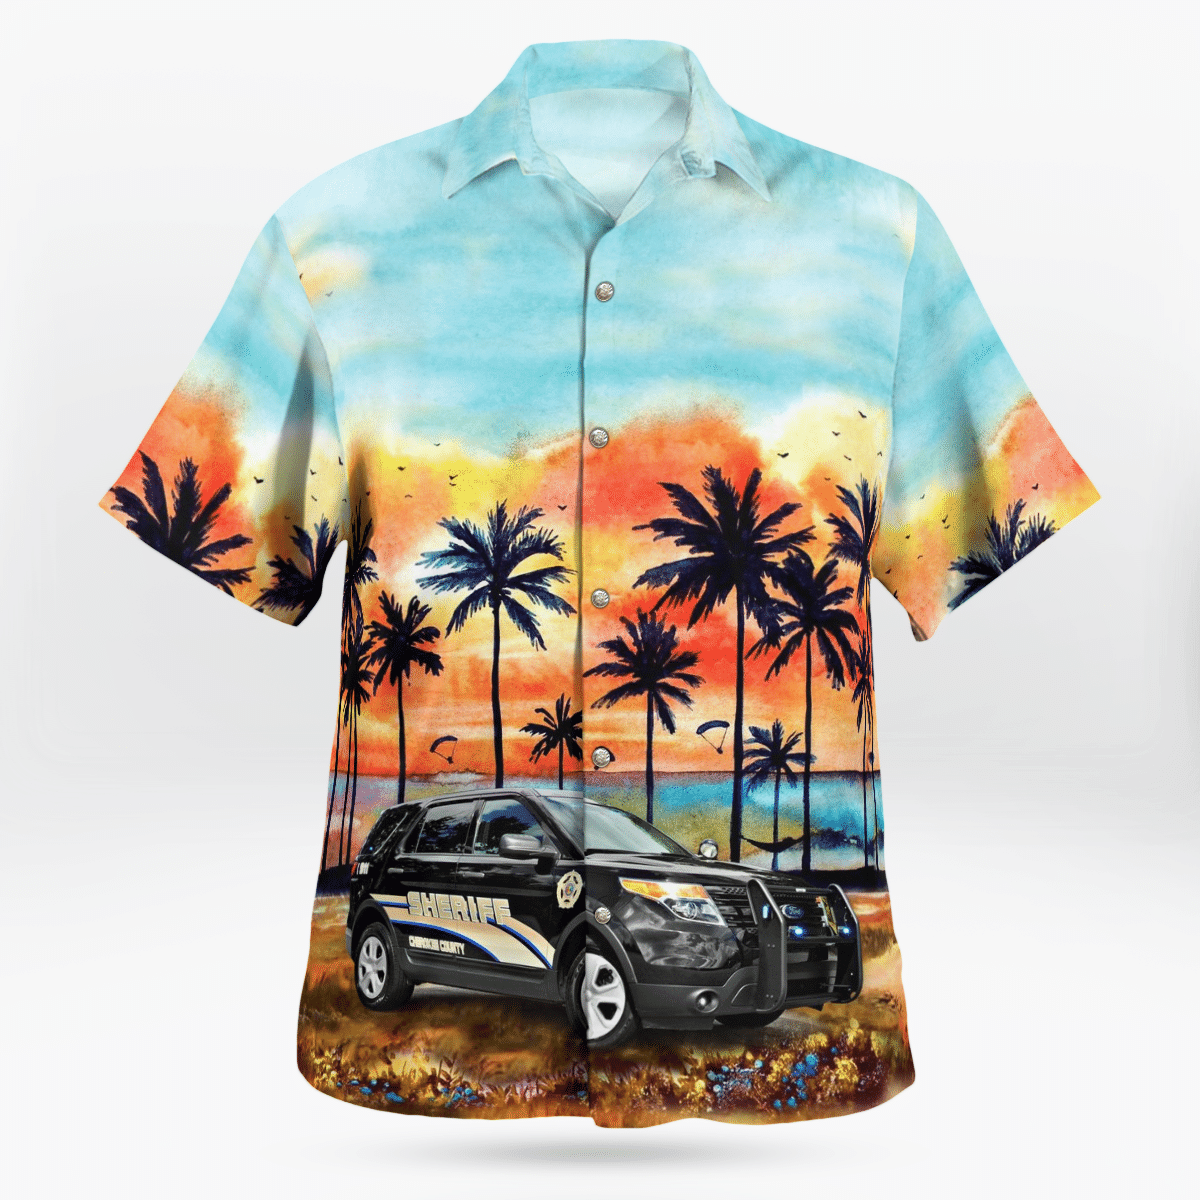 Hawaiian shirts never go out of style 103